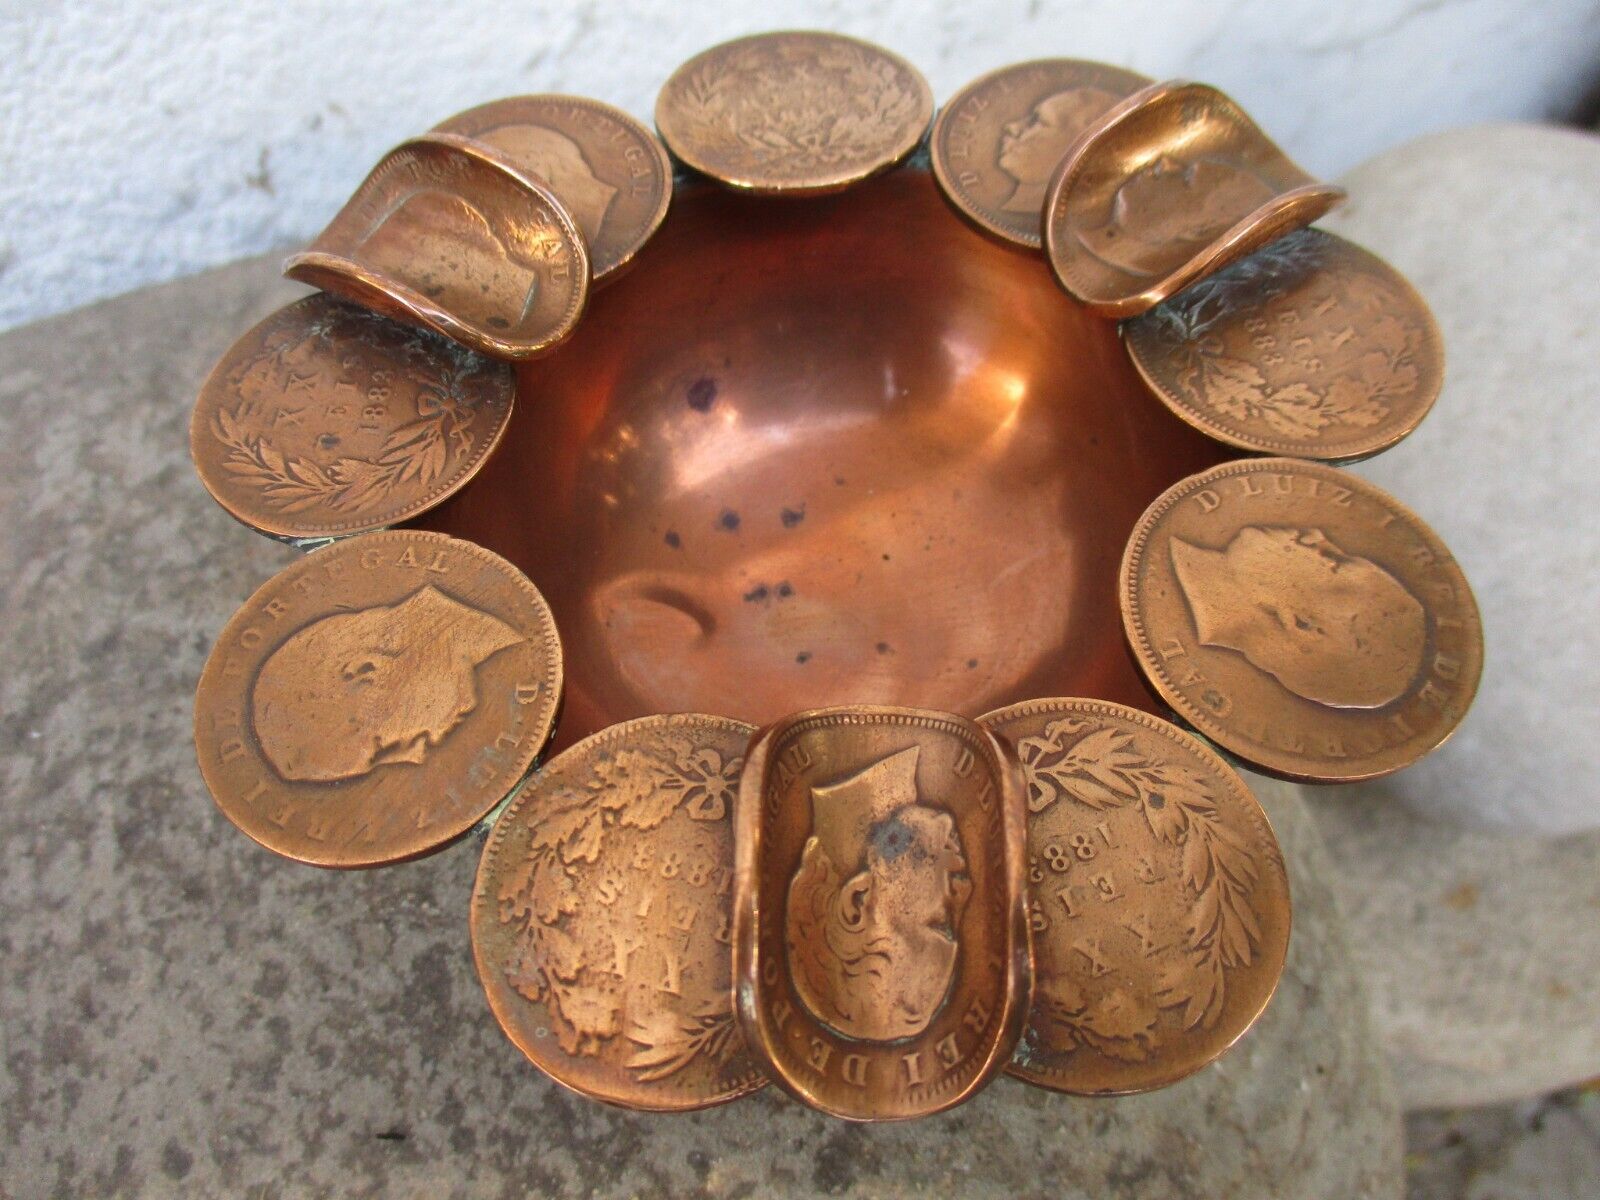 Vintage True Copper Unique Ashtray Beautiful Handmade Art With Coins (1883 All)